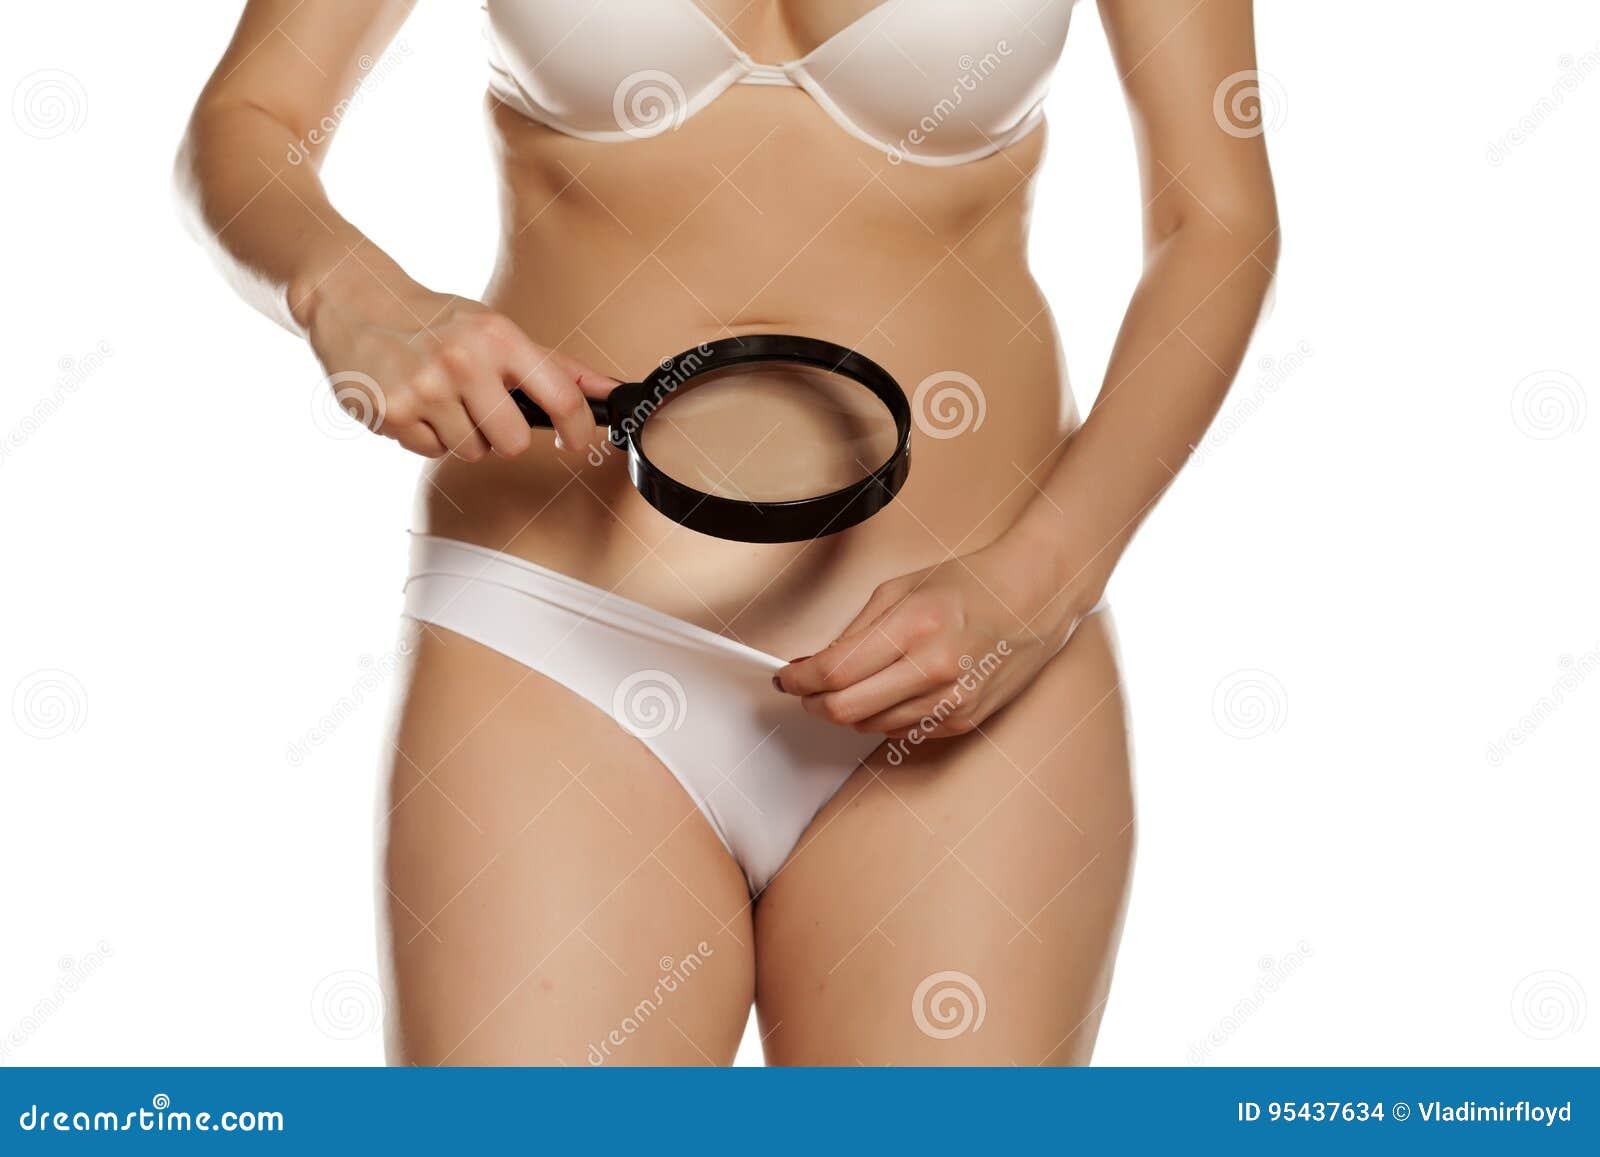 https://thumbs.dreamstime.com/z/looking-her-crotch-woman-vagina-underwear-magnifying-glass-95437634.jpg